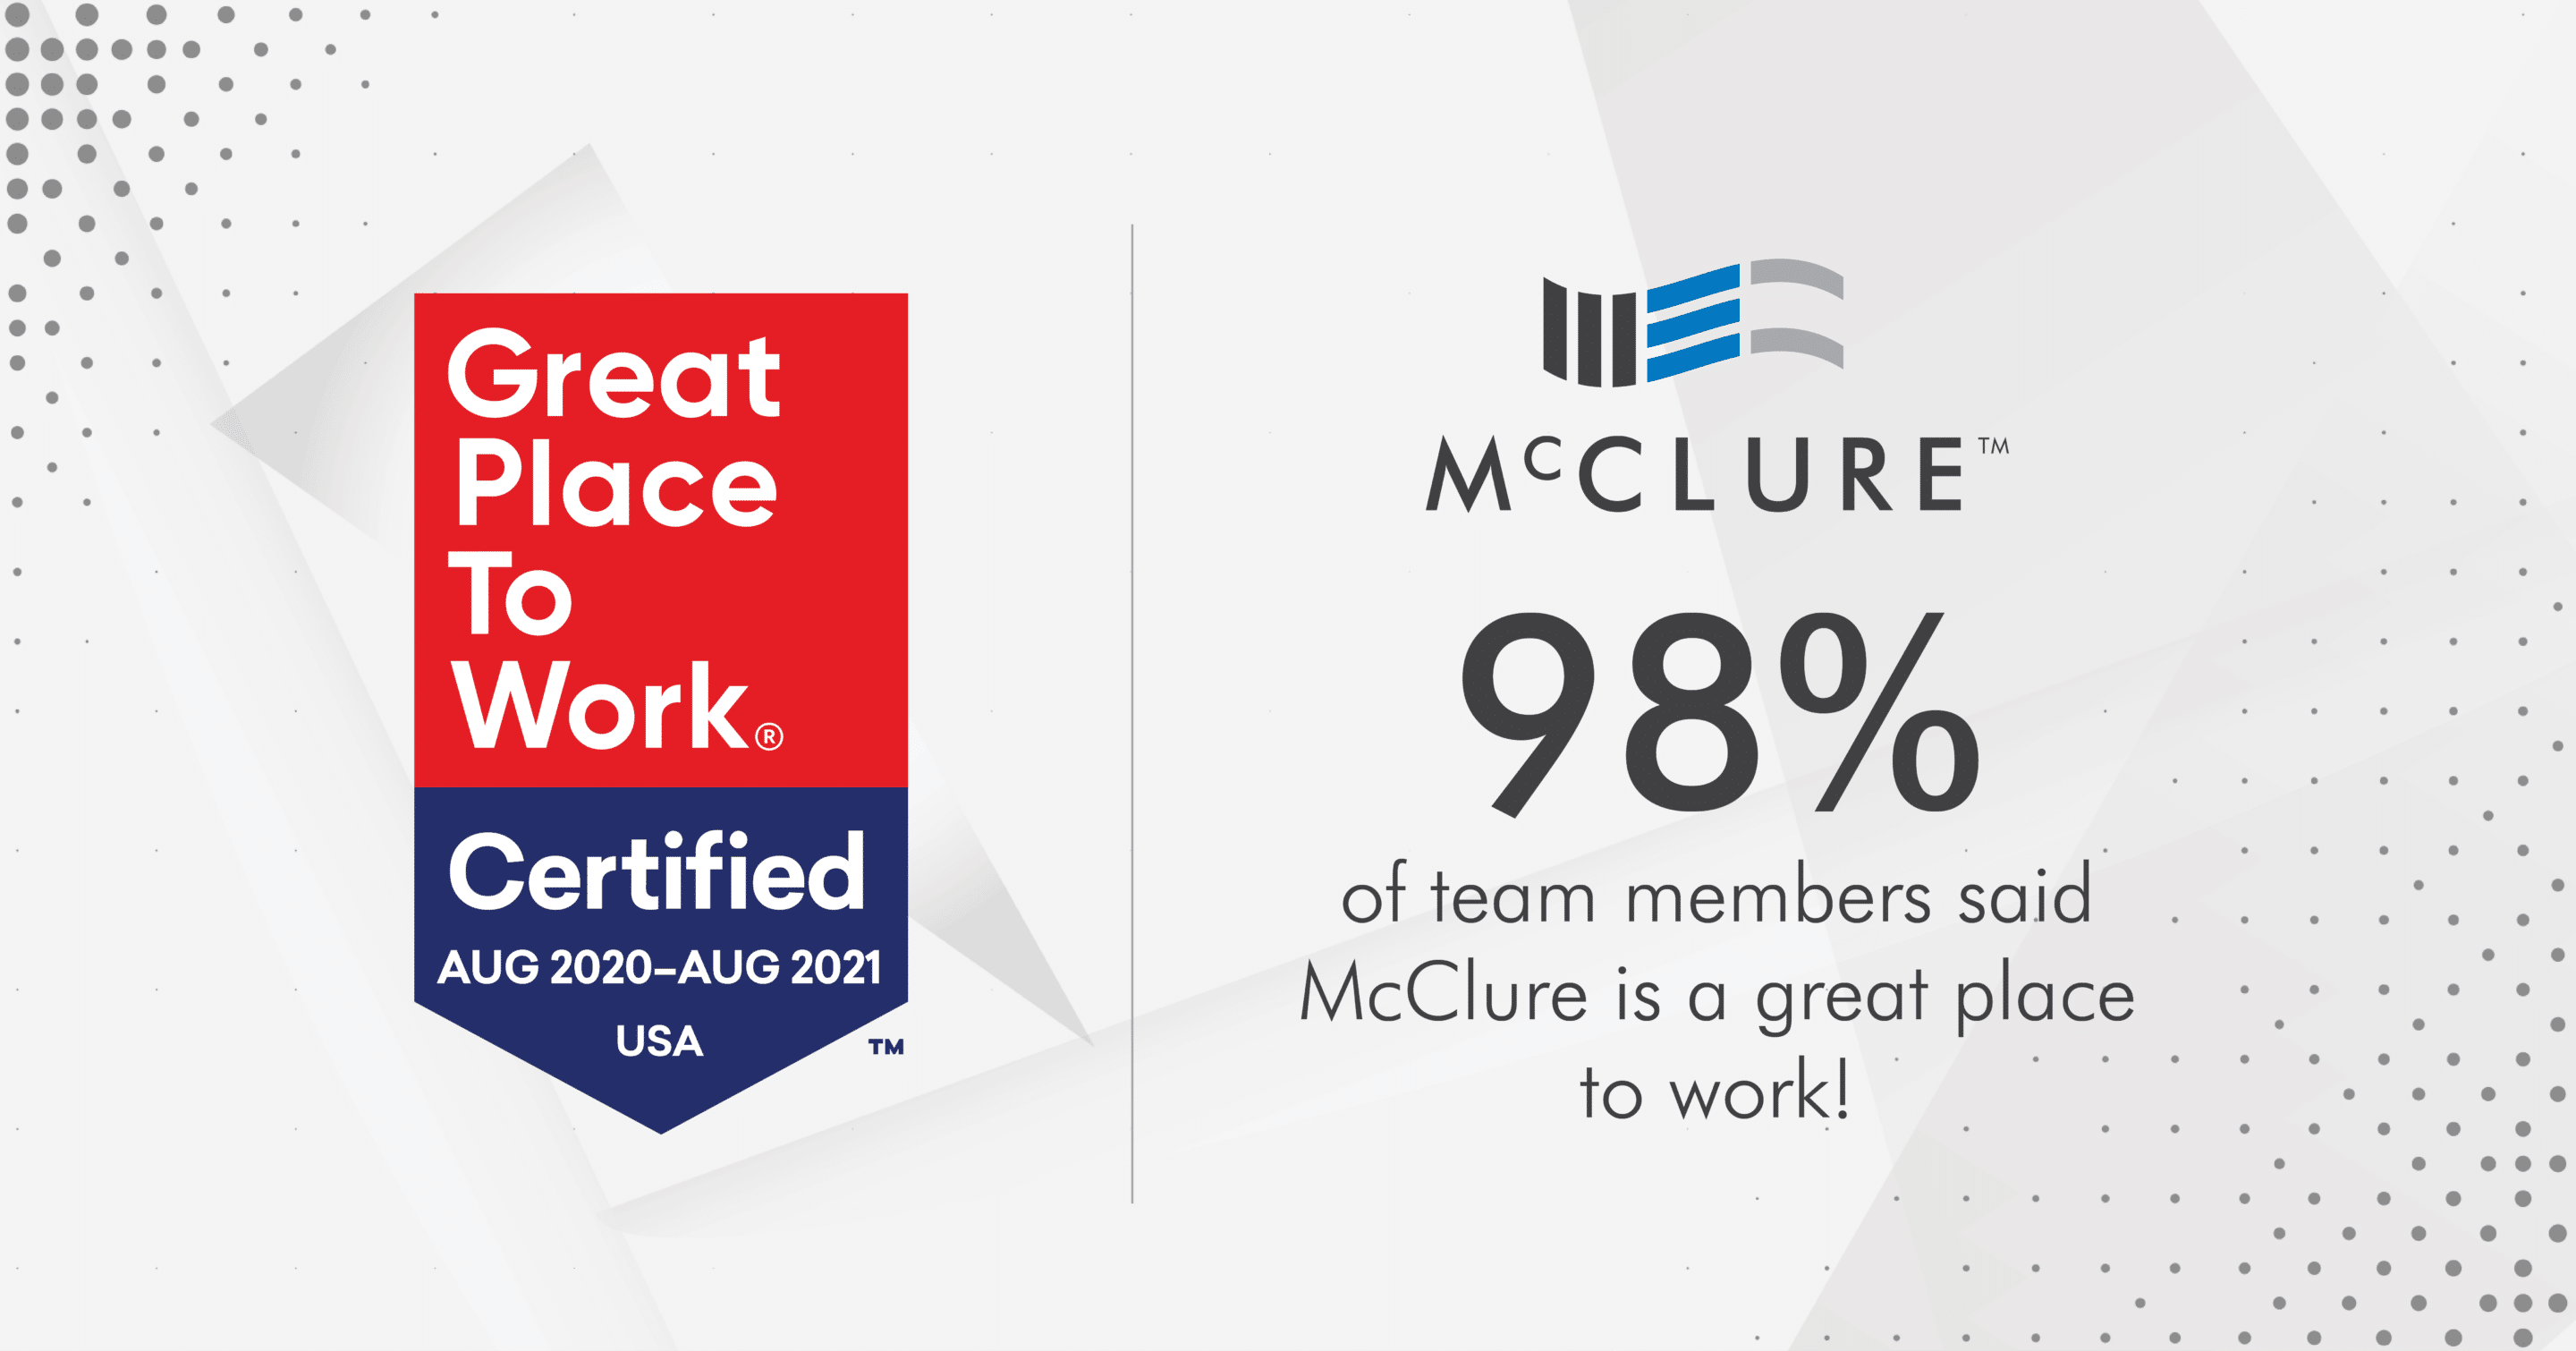 McClure Earns Designation as a Great Place to Work-Certified™ Company